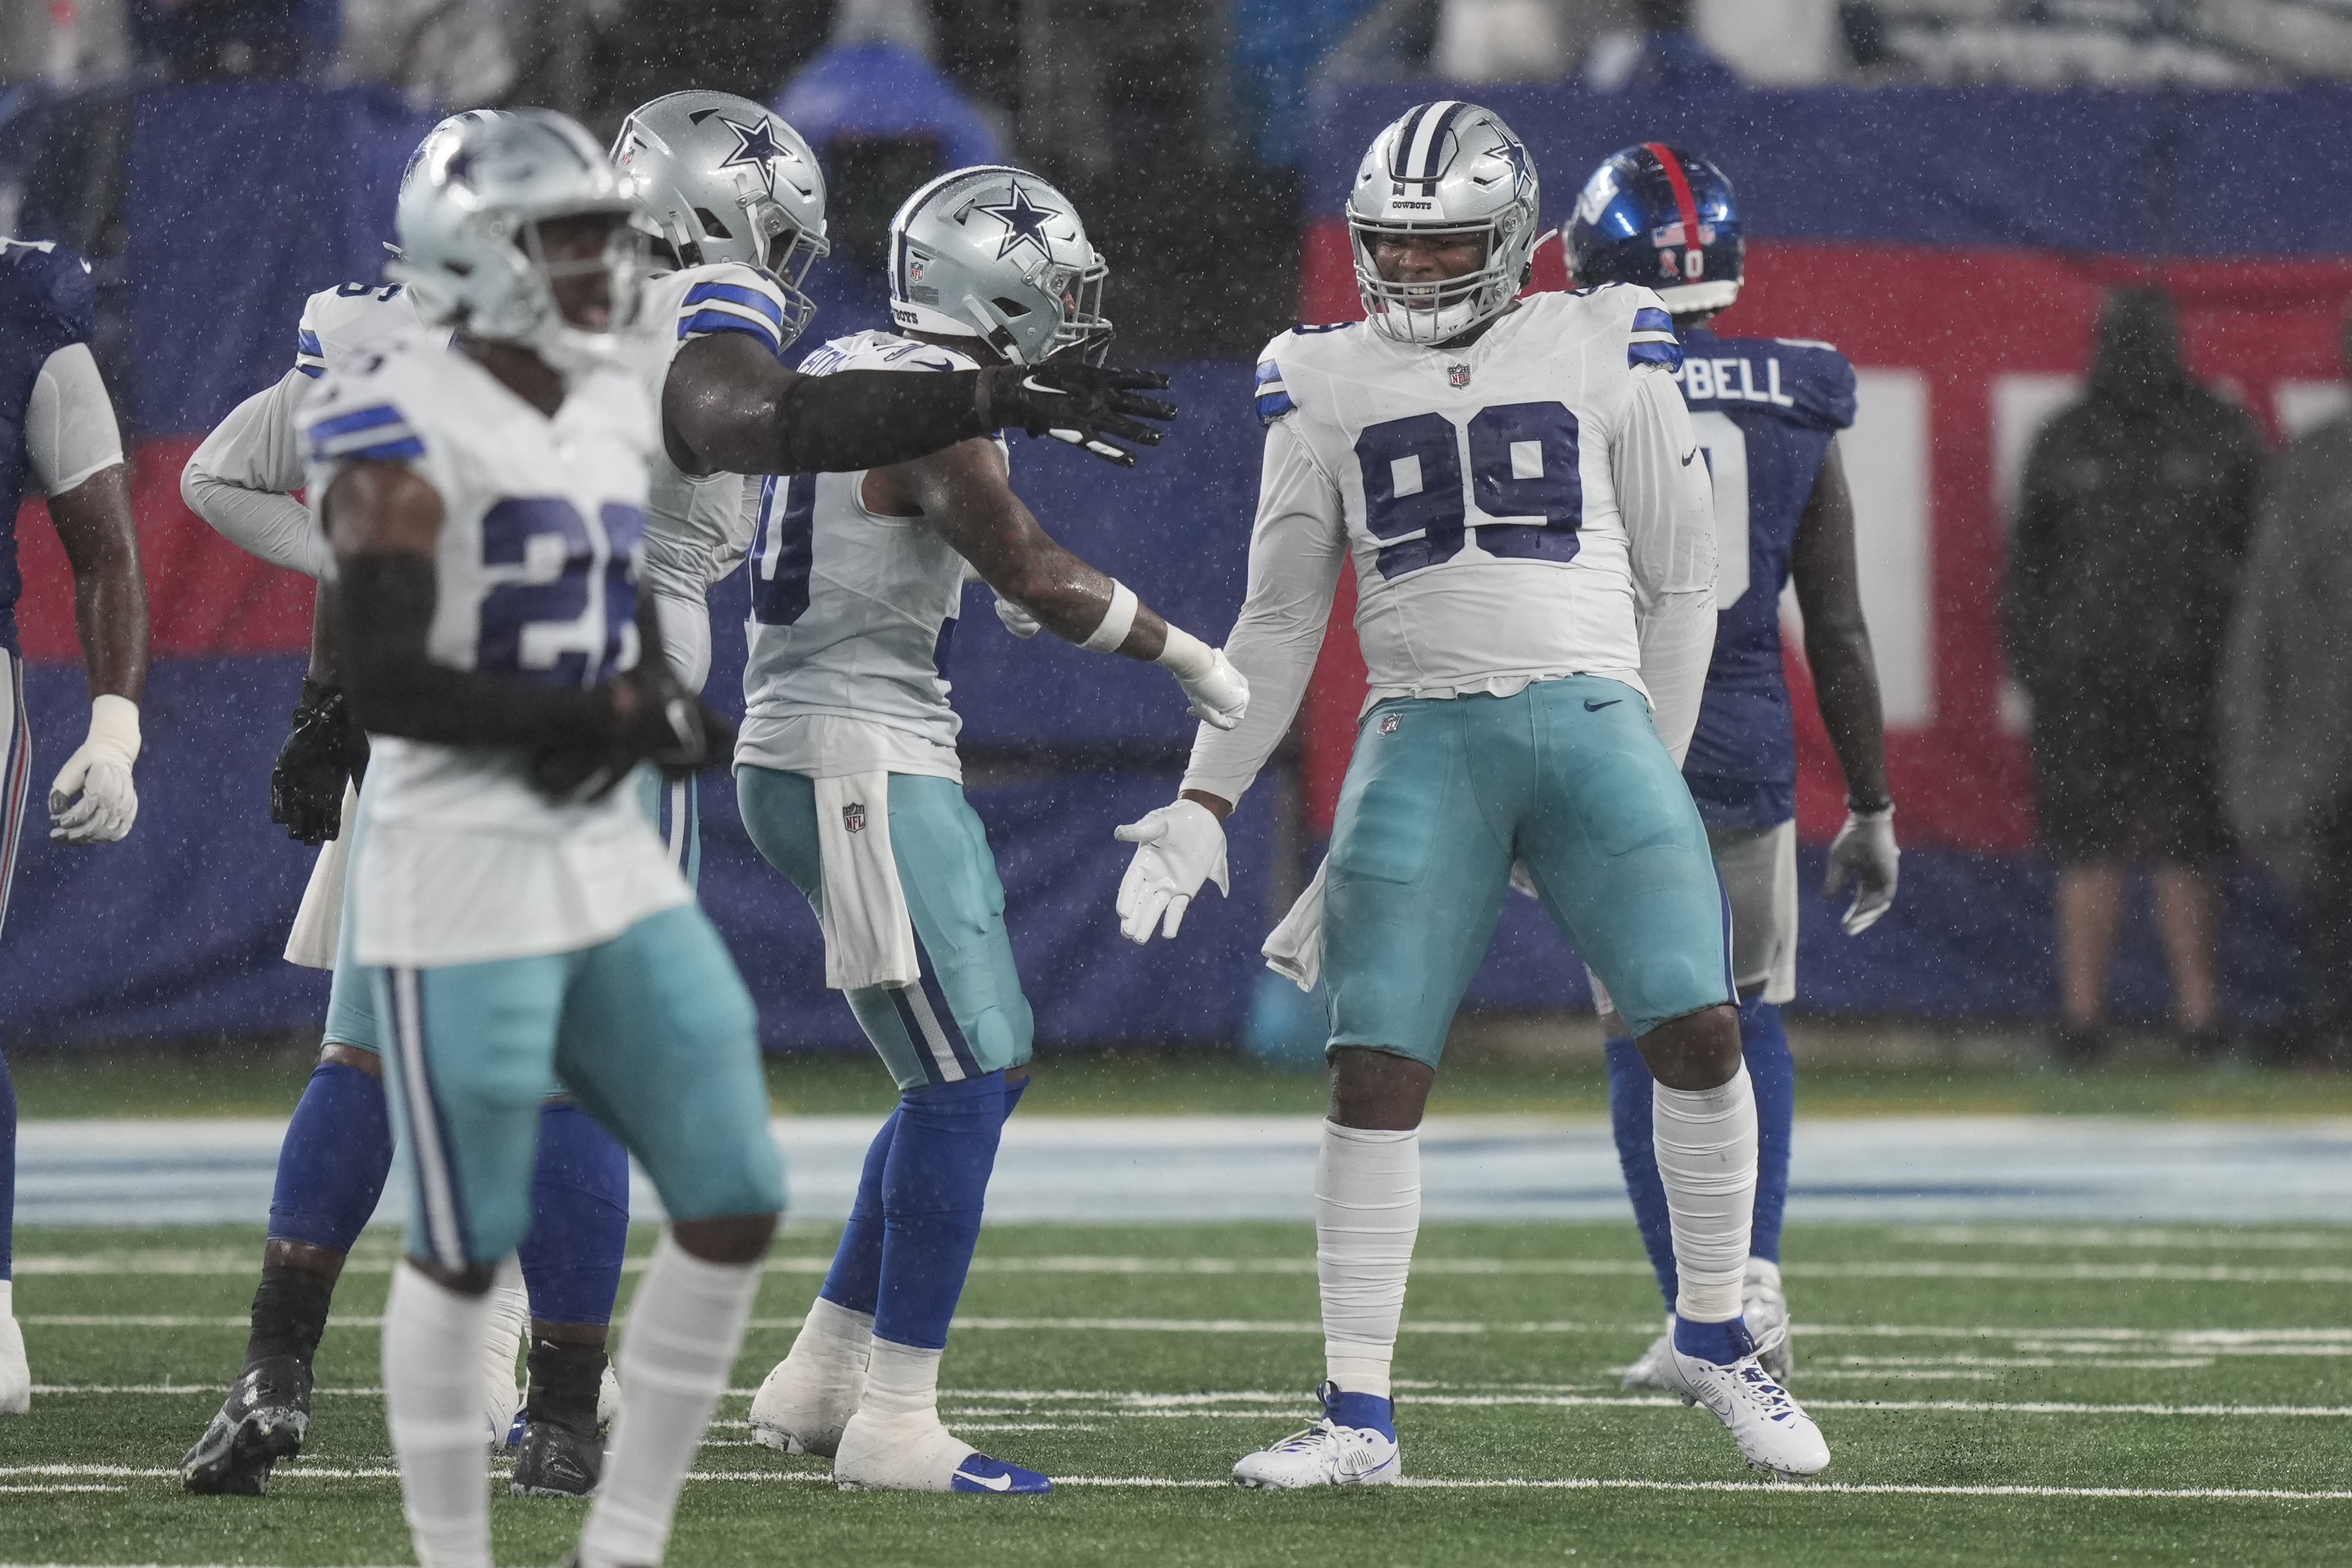 Cowboys rip Giants 40-0, making a huge statement in Week 1 of the